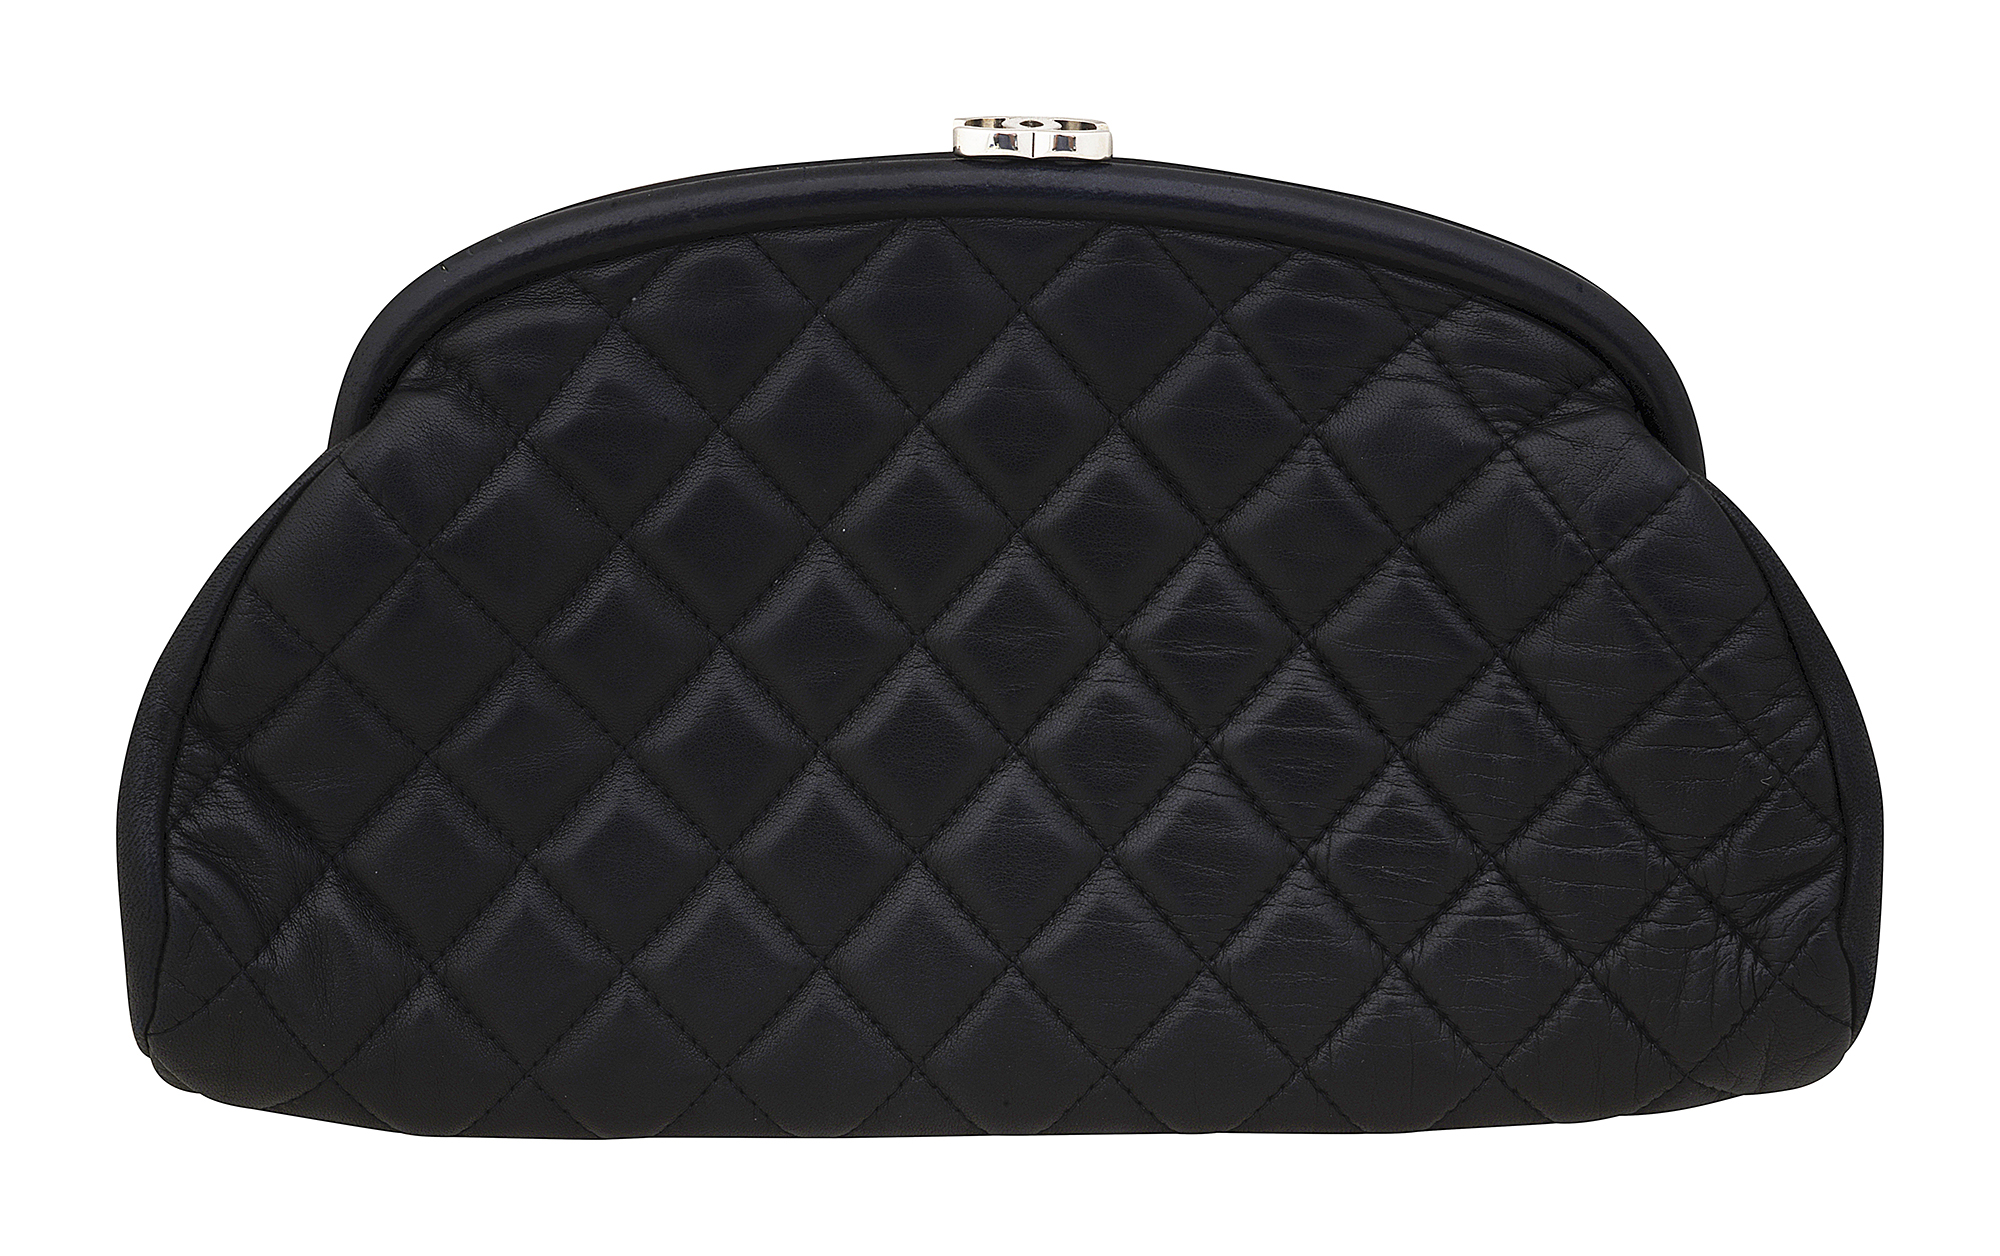 A Chanel black lambskin leather clutch bag - Image 2 of 3